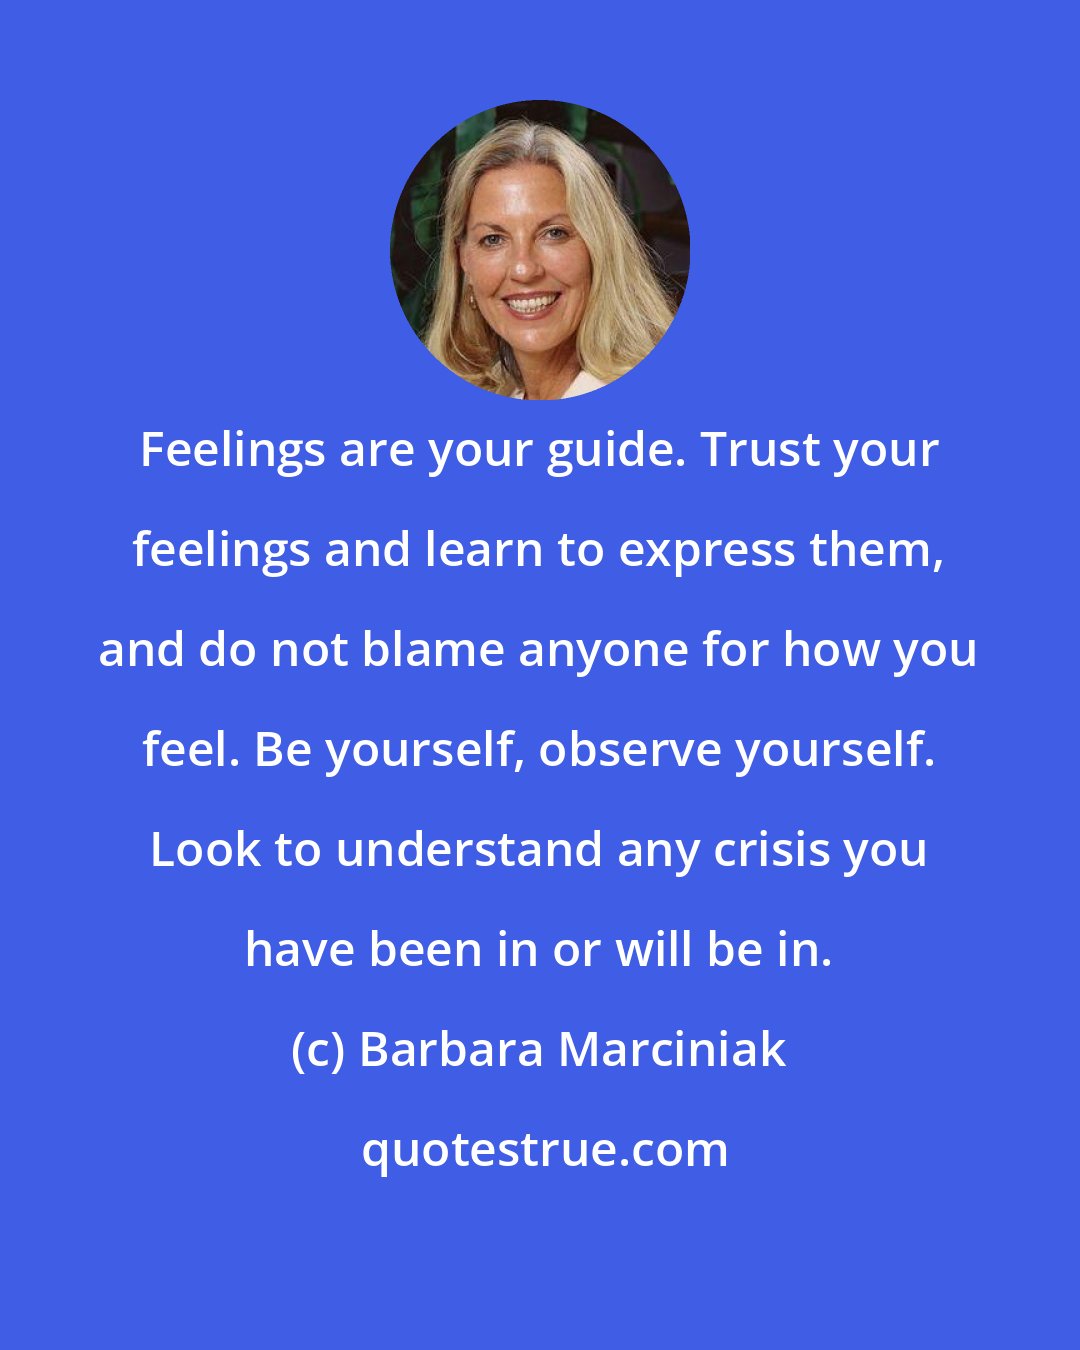 Barbara Marciniak: Feelings are your guide. Trust your feelings and learn to express them, and do not blame anyone for how you feel. Be yourself, observe yourself. Look to understand any crisis you have been in or will be in.